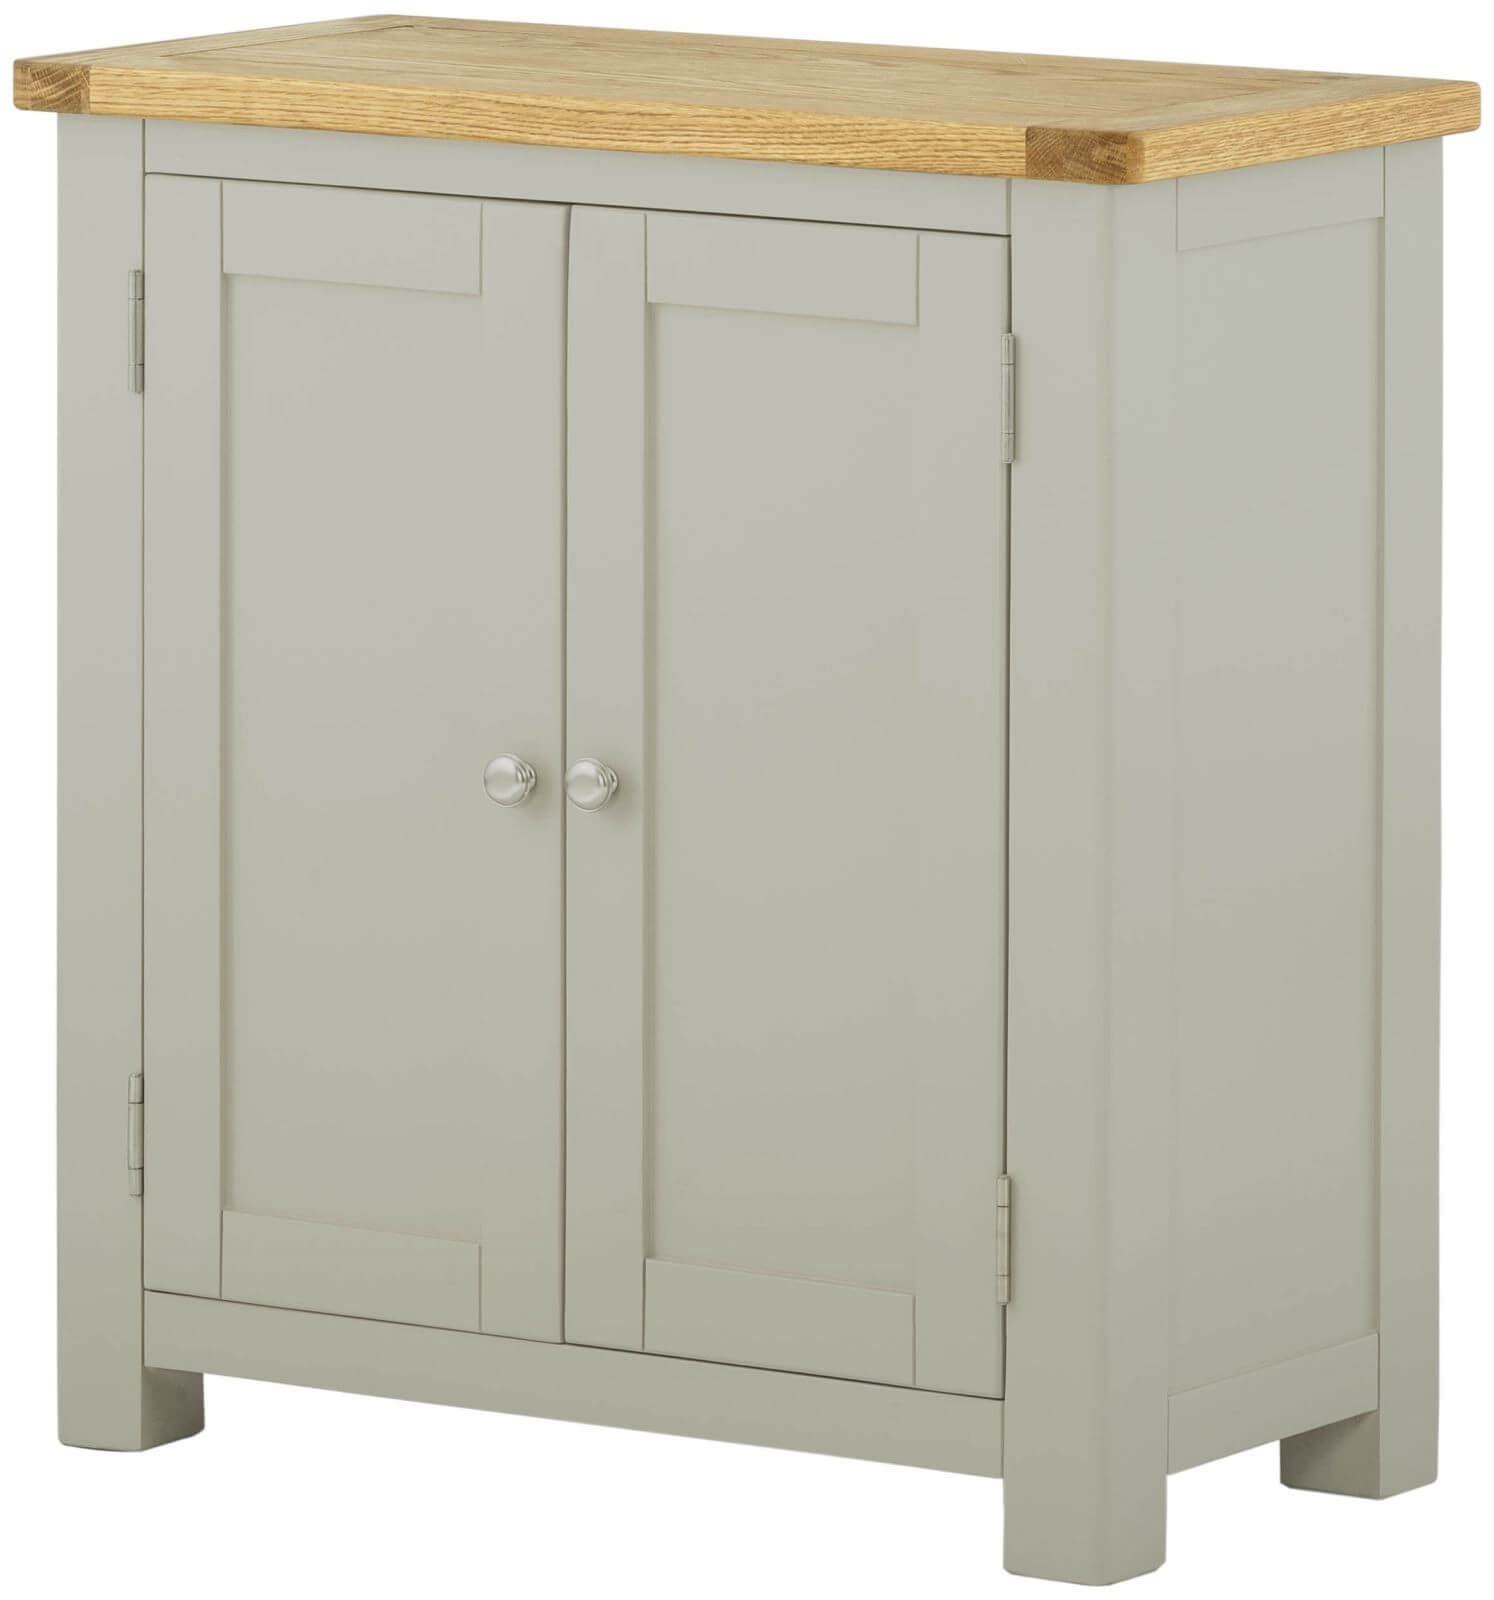 Showing image for Seattle 2-door cabinet - stone